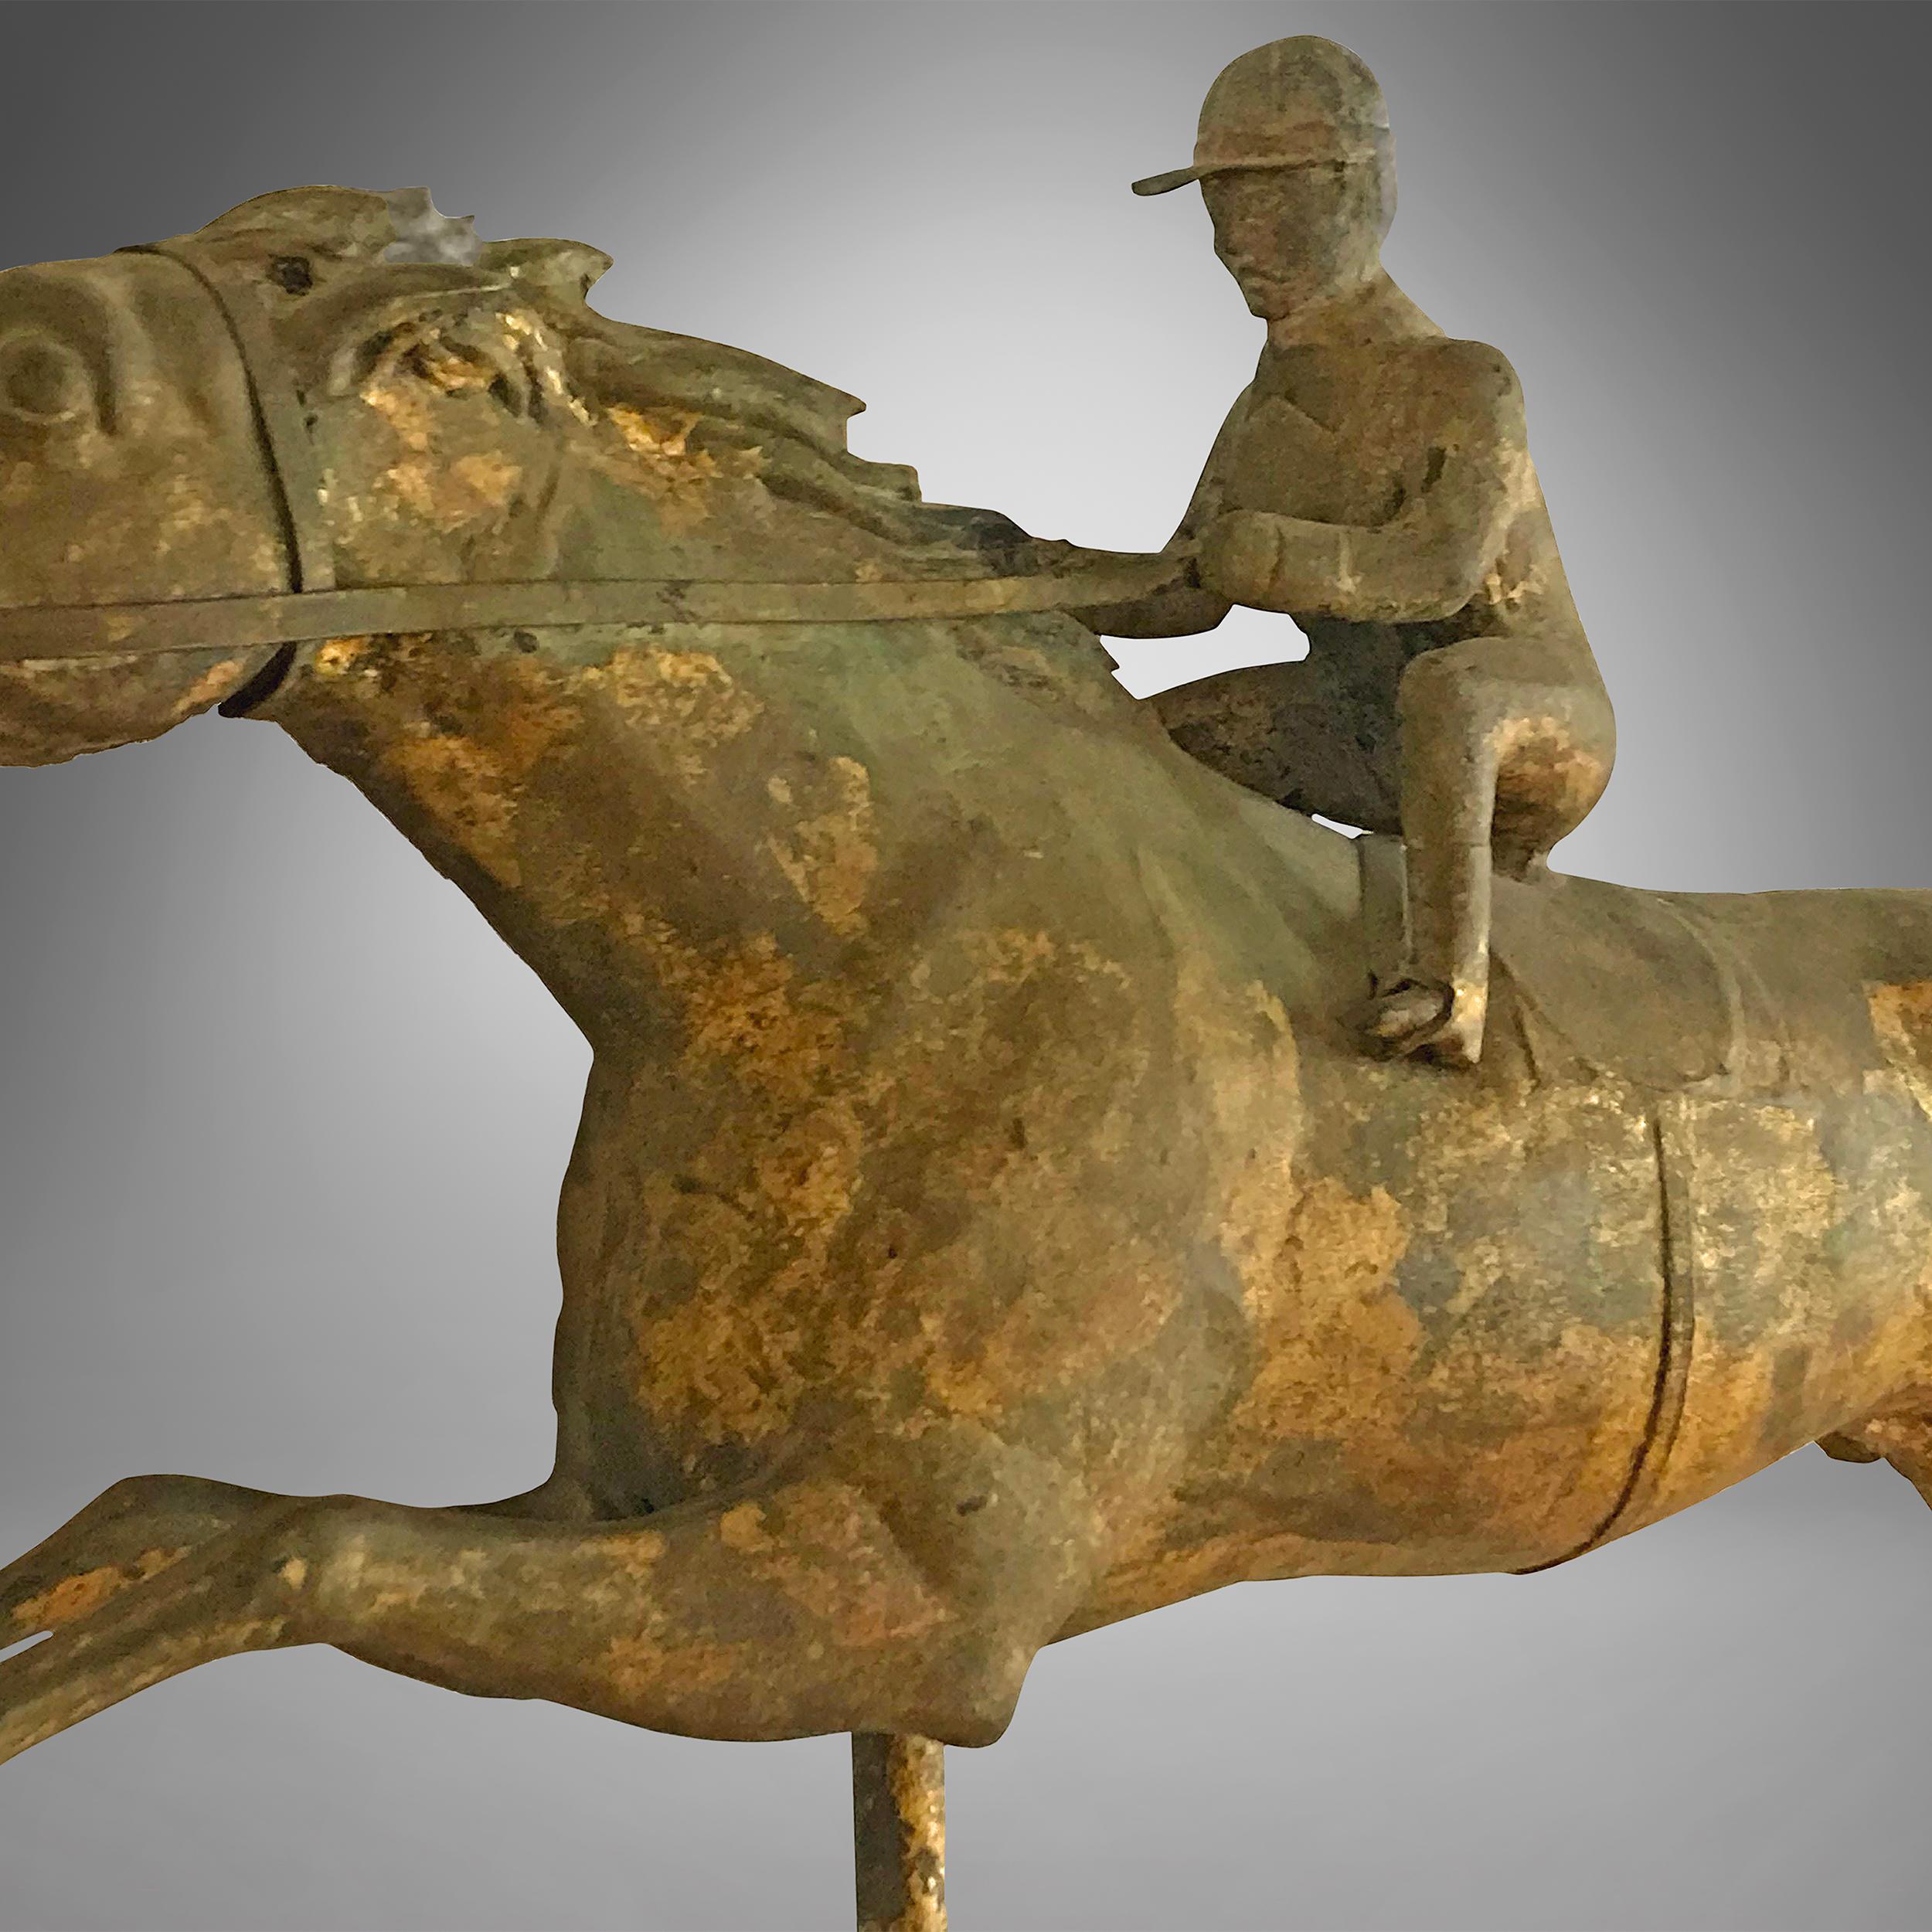 Molded copper and zinc weathervane with gilding. The surface is untouched showing great warm patina. This style of racing horse was named 'Kentucky and Jockey' weathervane in the J.W. Fiske Company catalog
Attributed to the J.W.Fiske Company, circa